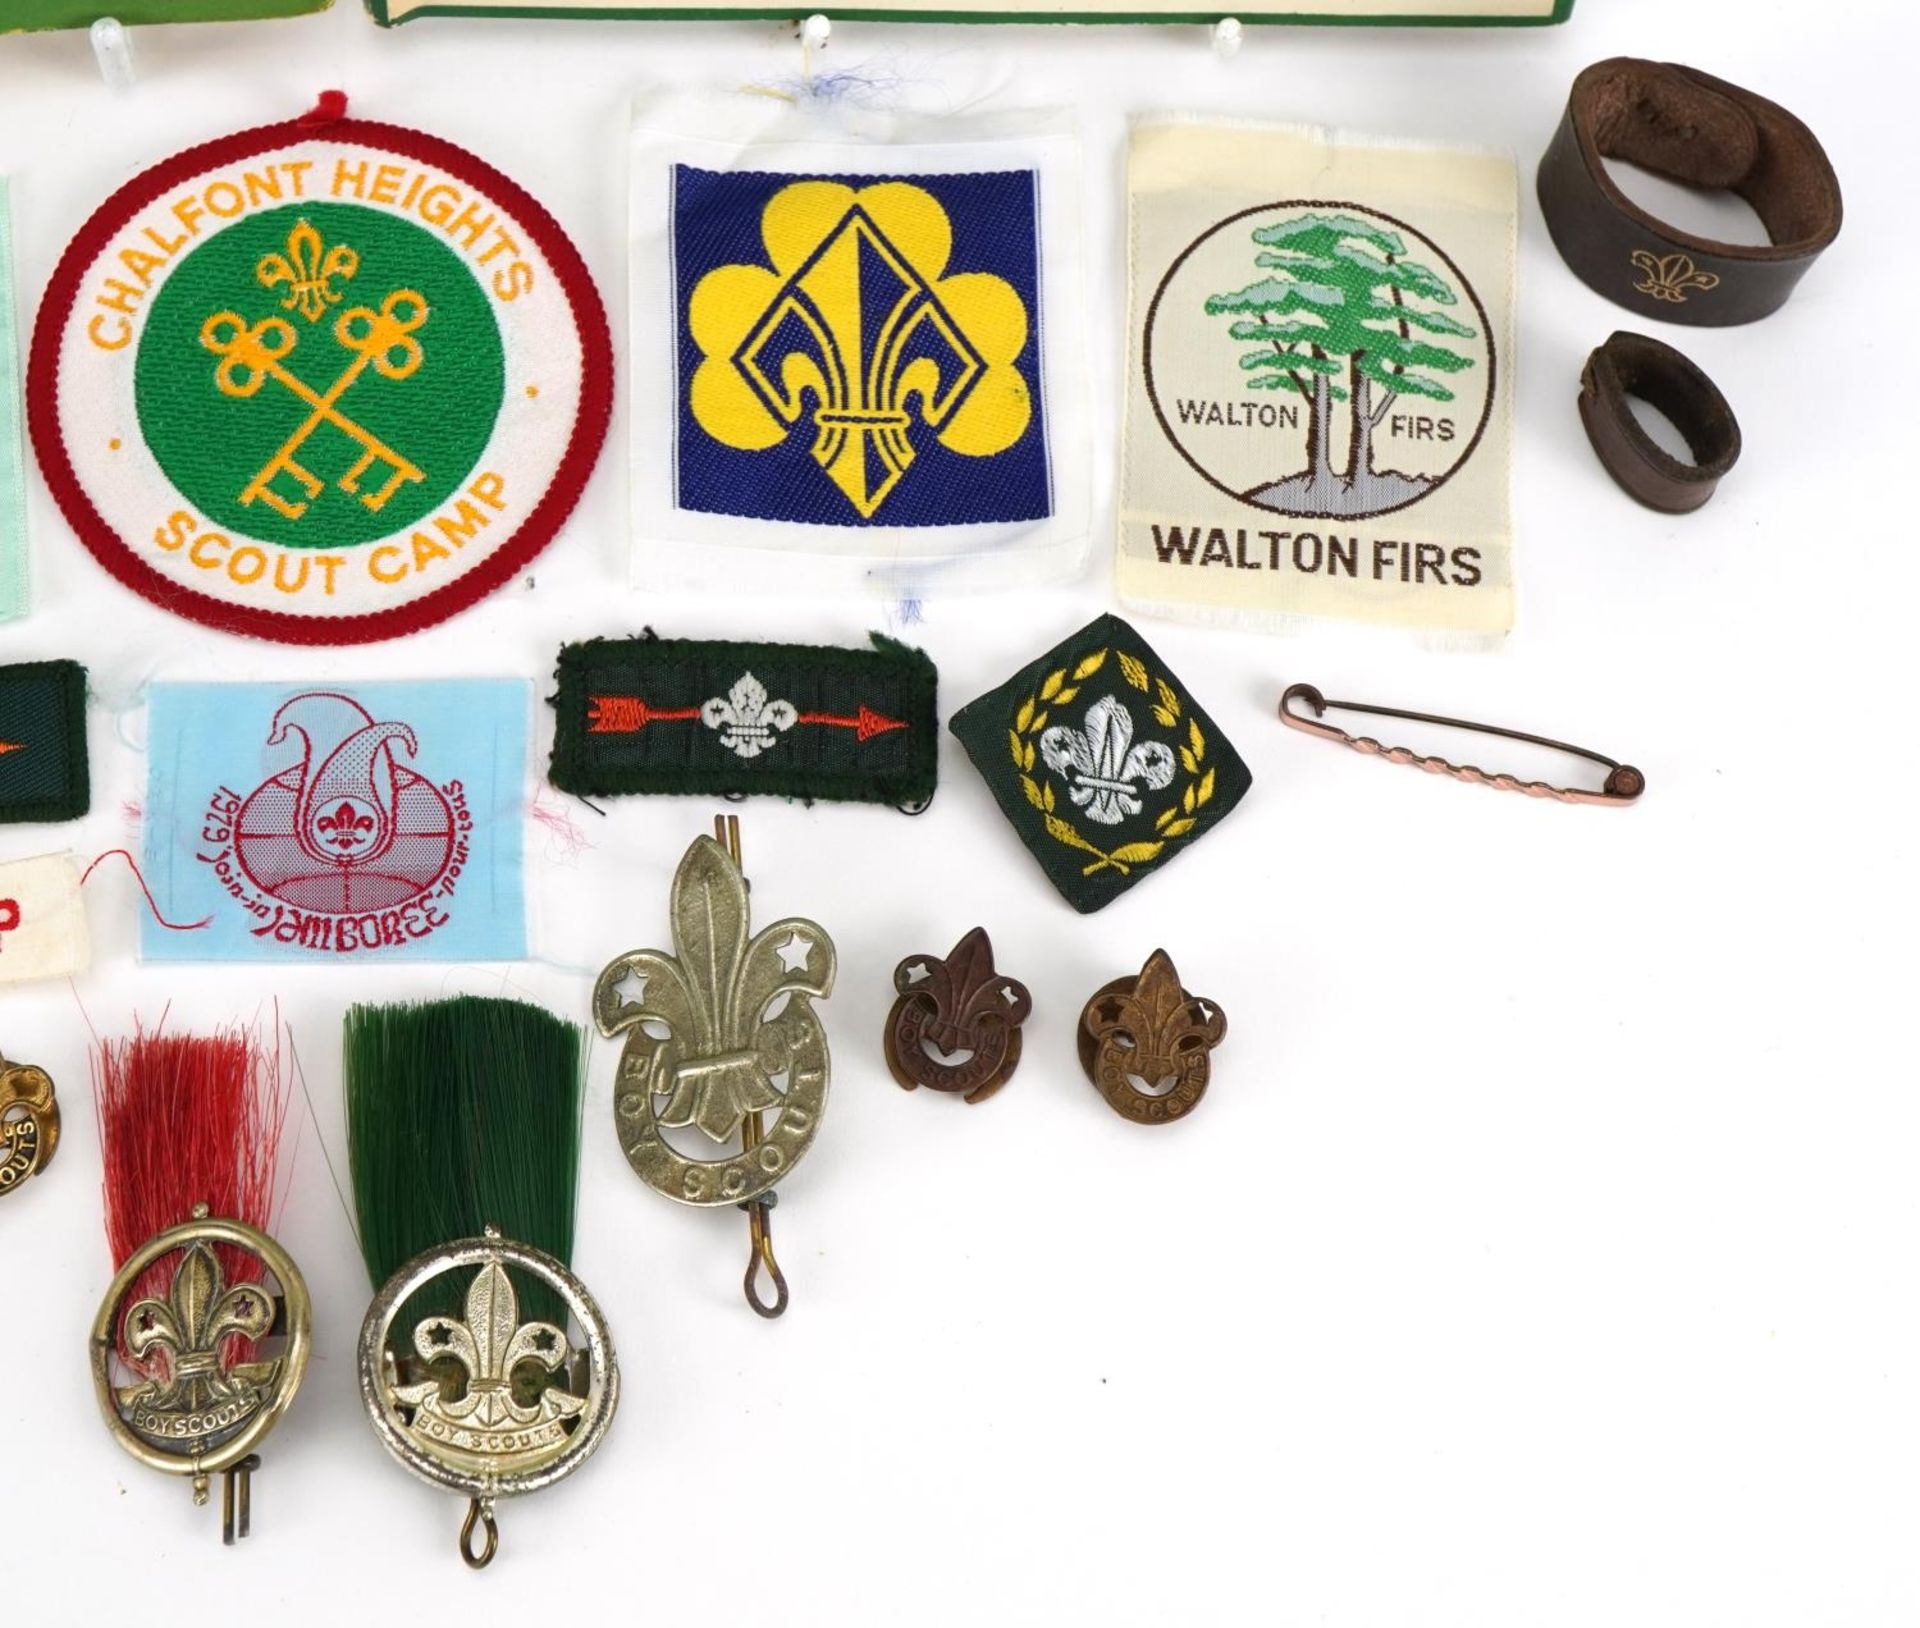 Scouting interest collectables including two hardback books and badges For further information on - Image 4 of 9